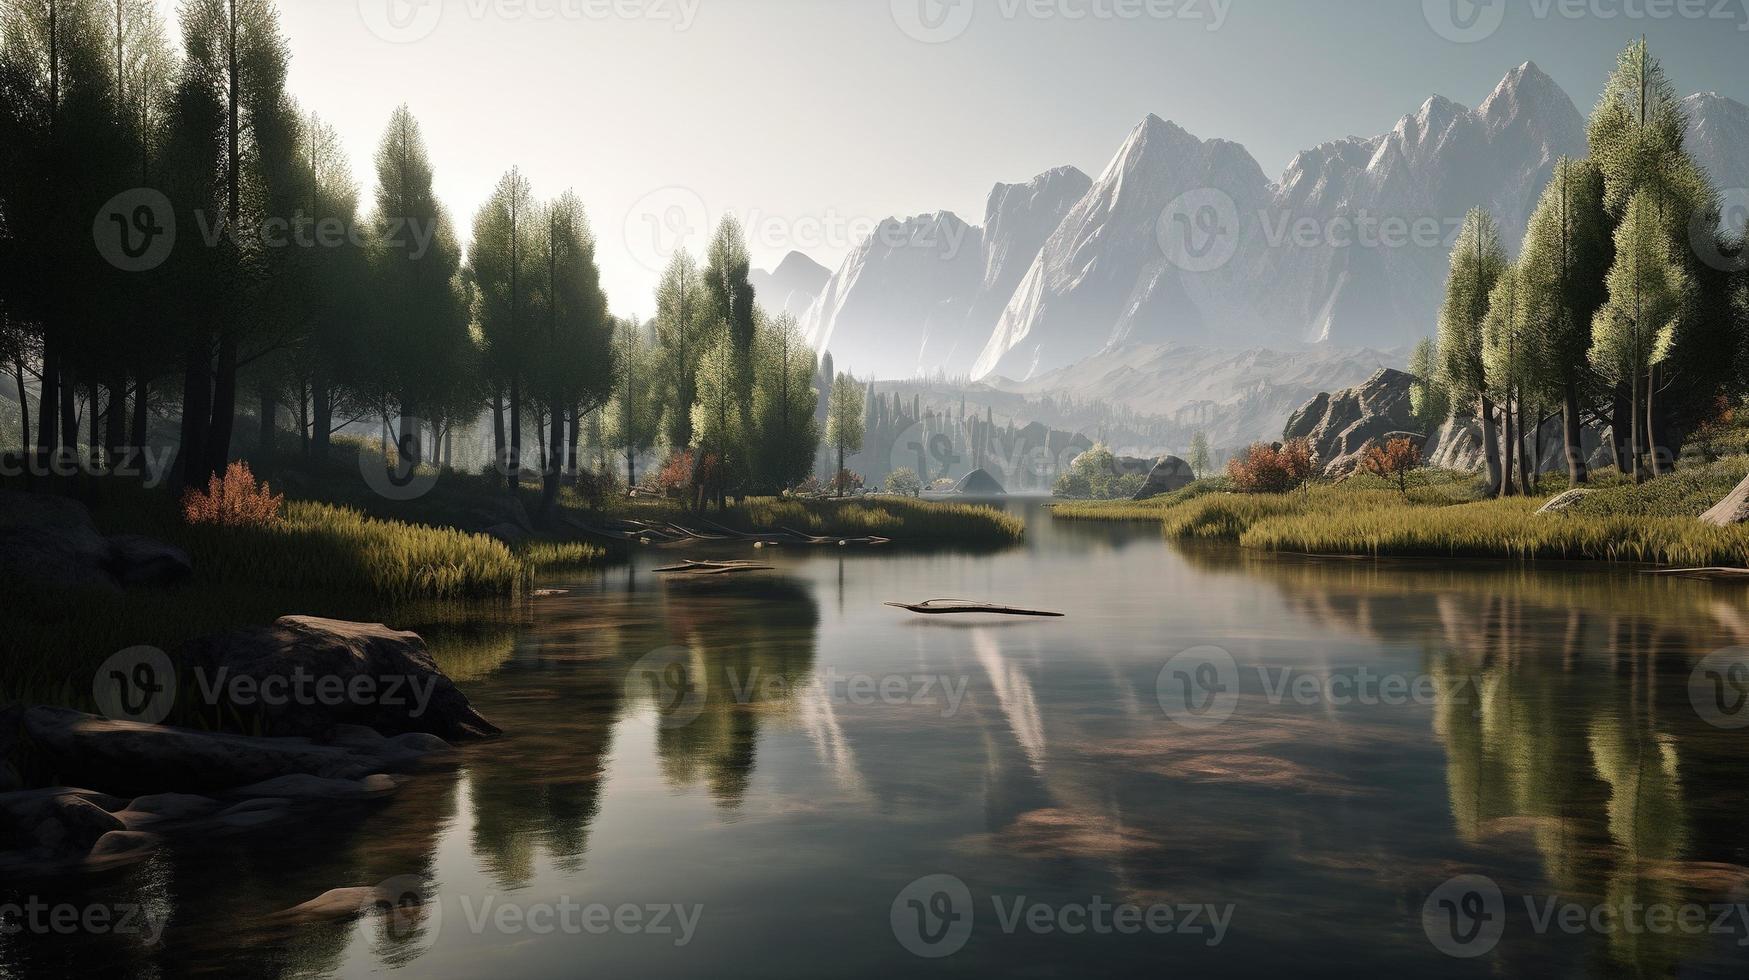 Beautiful landscape with mountain lake and reflection in water 22137815  Stock Photo at Vecteezy